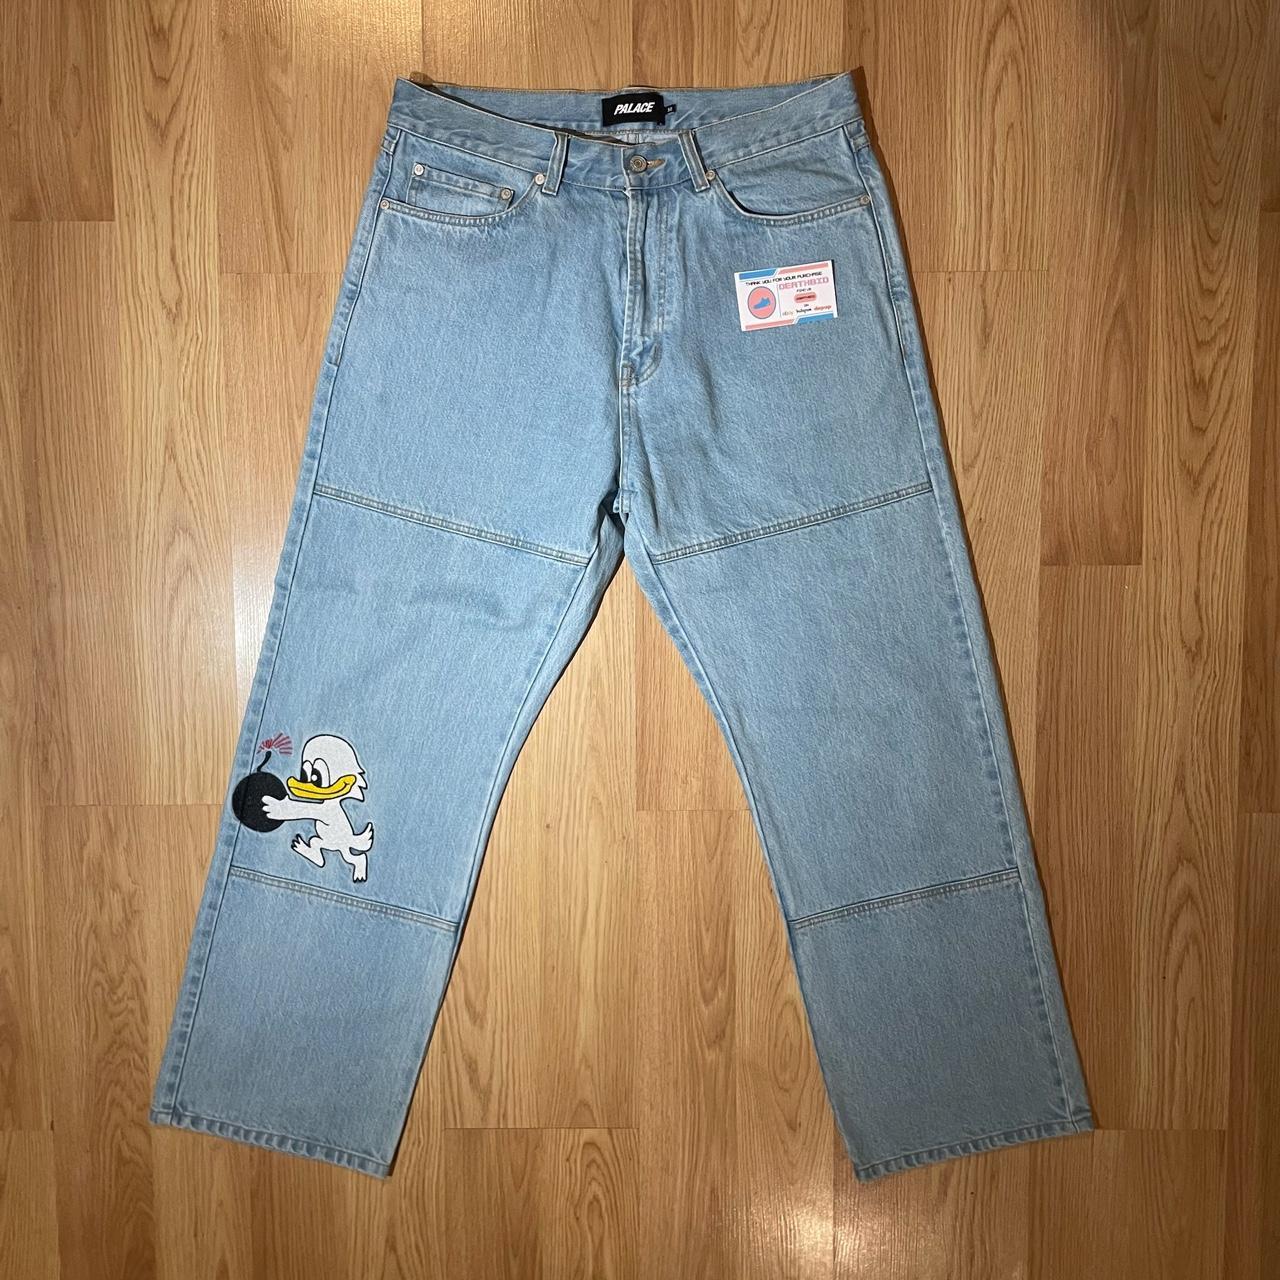 Palace Duck Bomb Panel Jeans Blue 32. Trousers have... - Depop